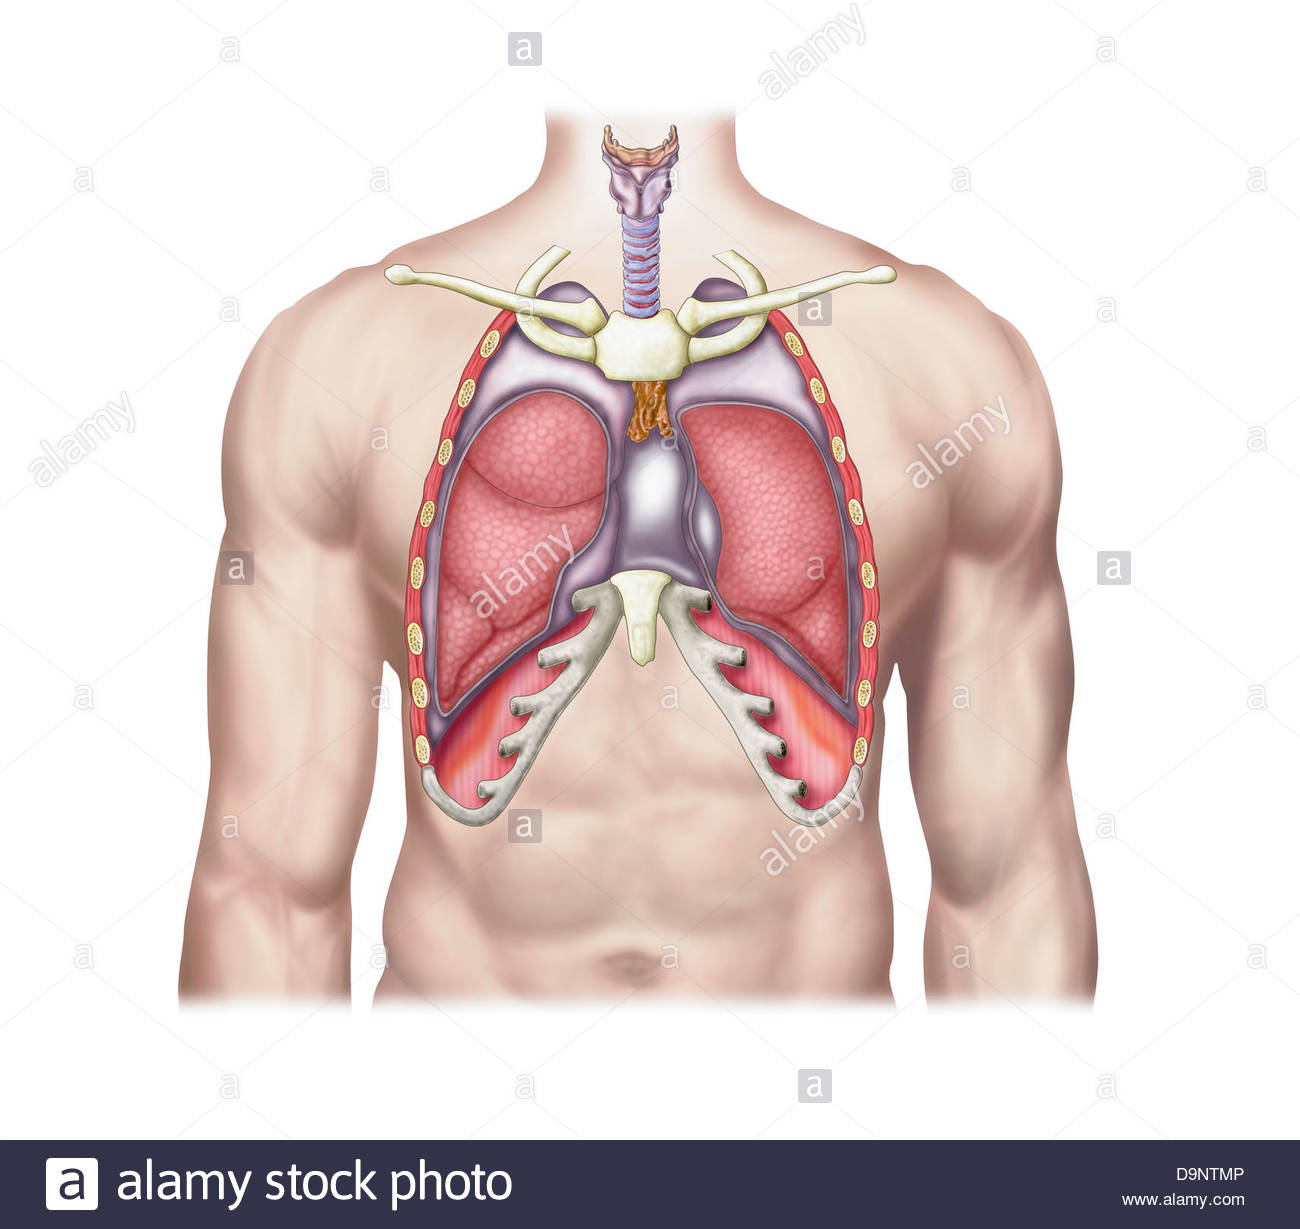 Anatomy of human lungs in situ. - Stock Image